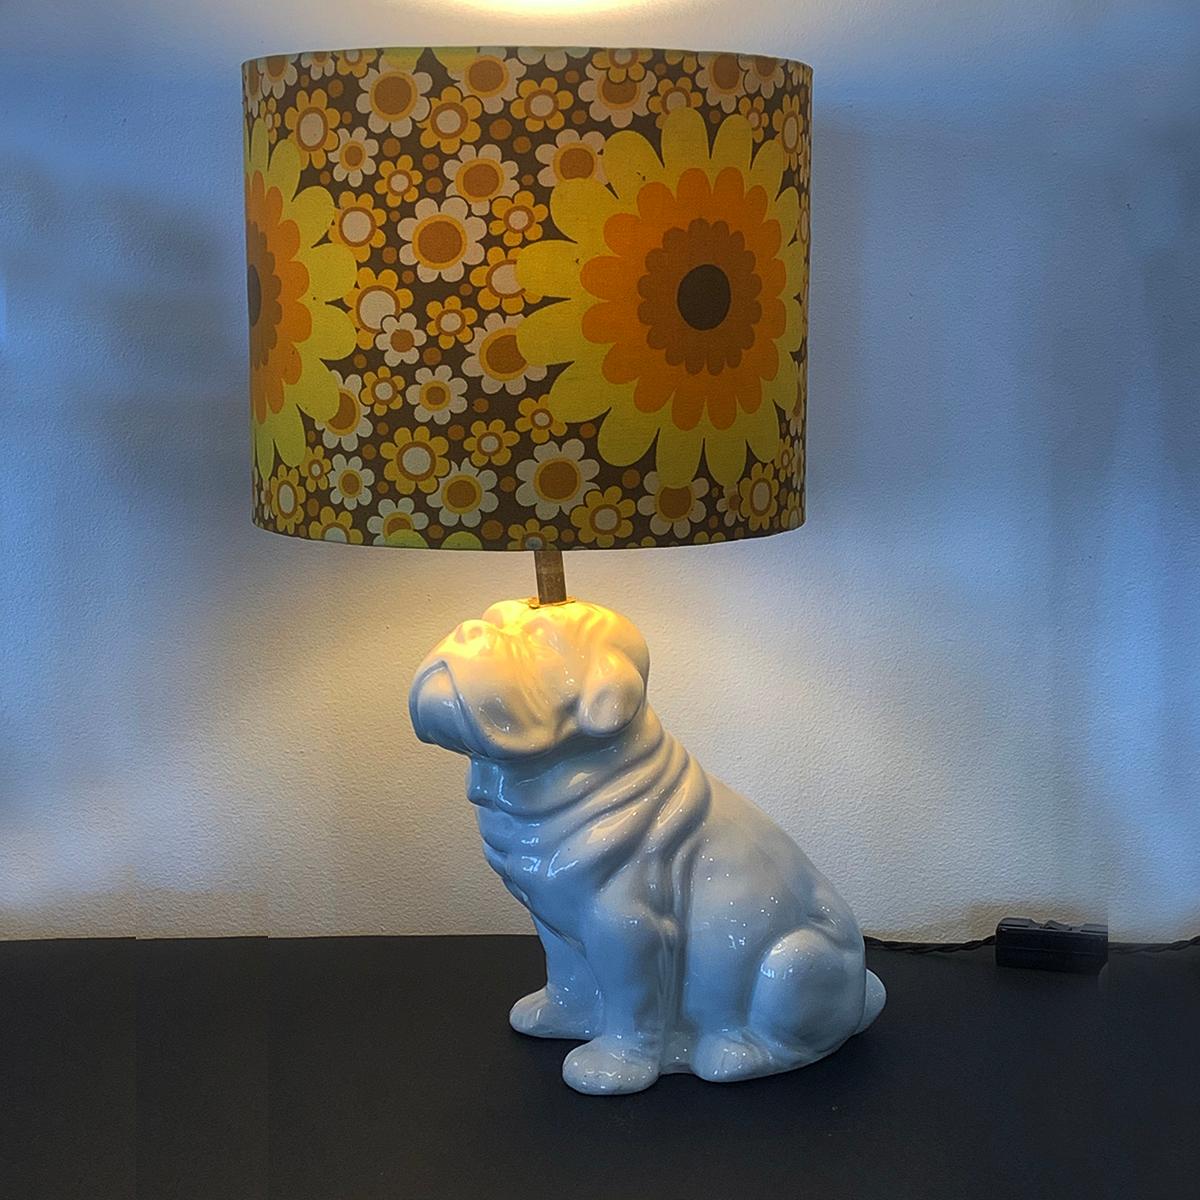 Italian Bulldog Lamp in the Fornasetti style with bright, Original Shade, in excellent condition. The Bulldog is perfect and strong as new, but it has had a minor “invisible” repair in the past at sometime, but this is described only to be exact in